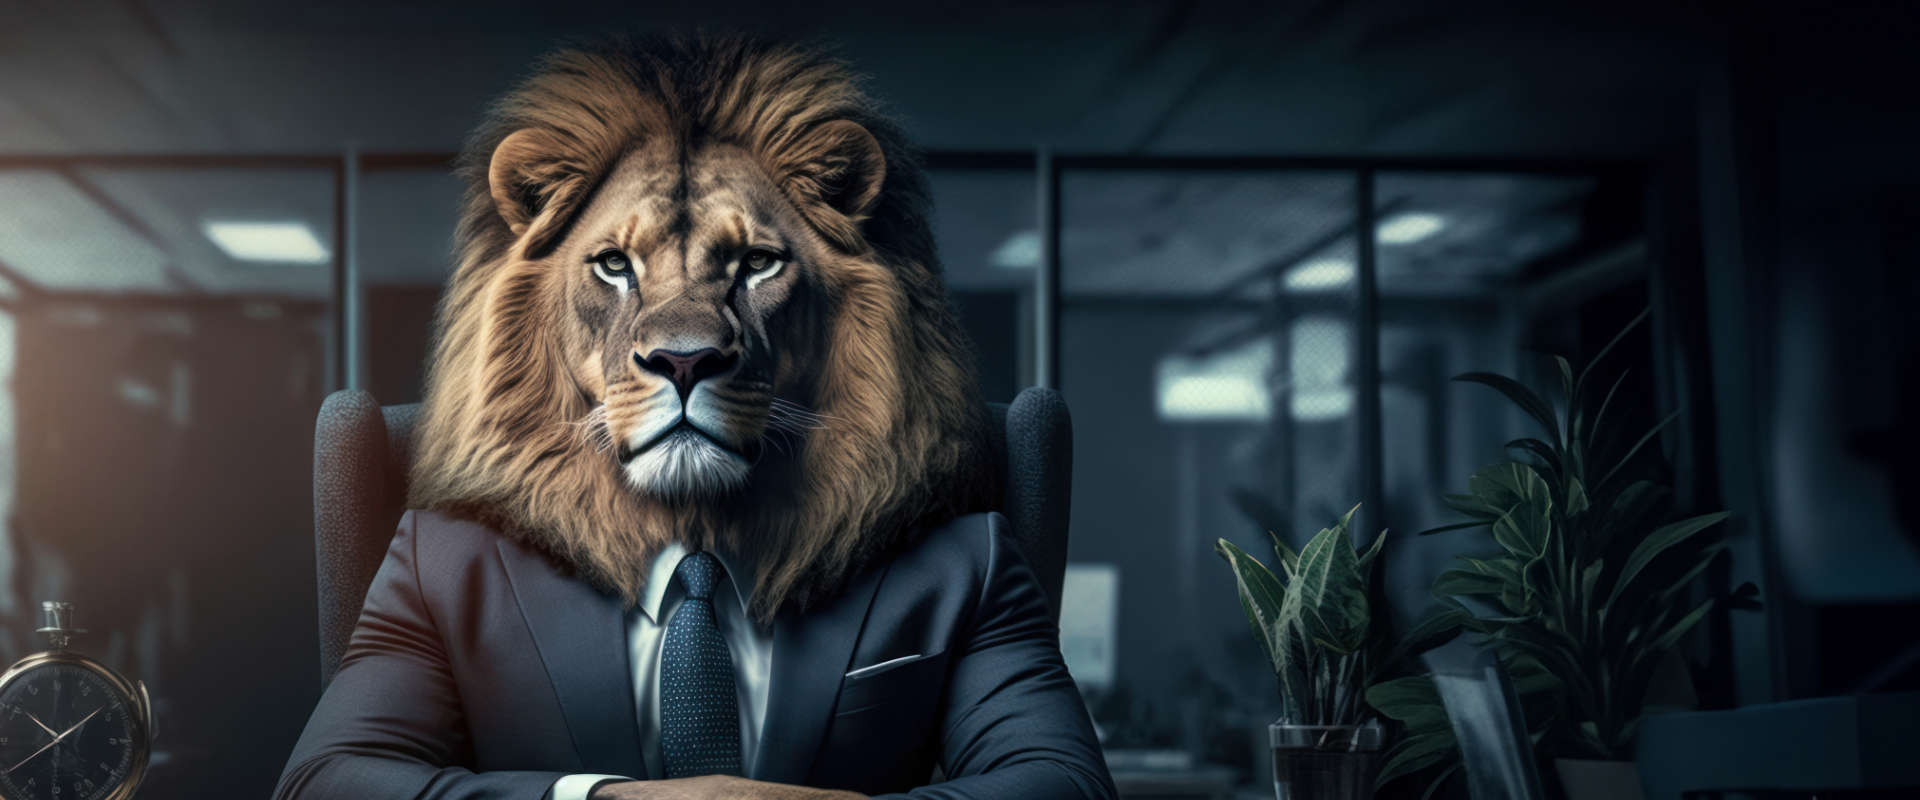 The lion who manages your data-business